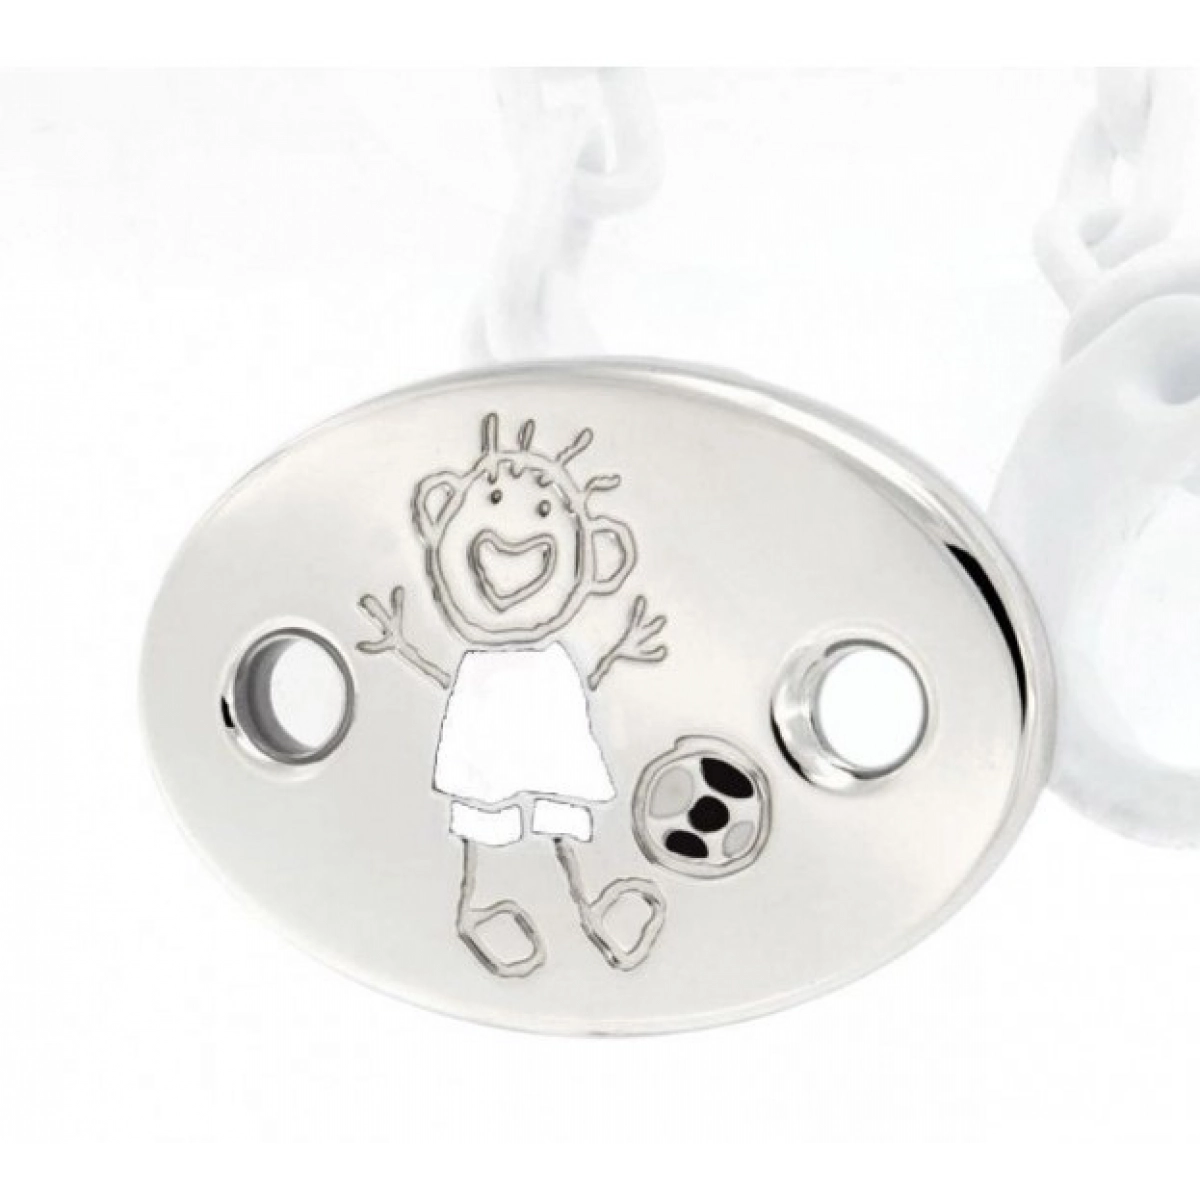 Gift items PINZA CHUPETE TOTO ENAMELLED IN WHITE-Craft-000200449 0212016